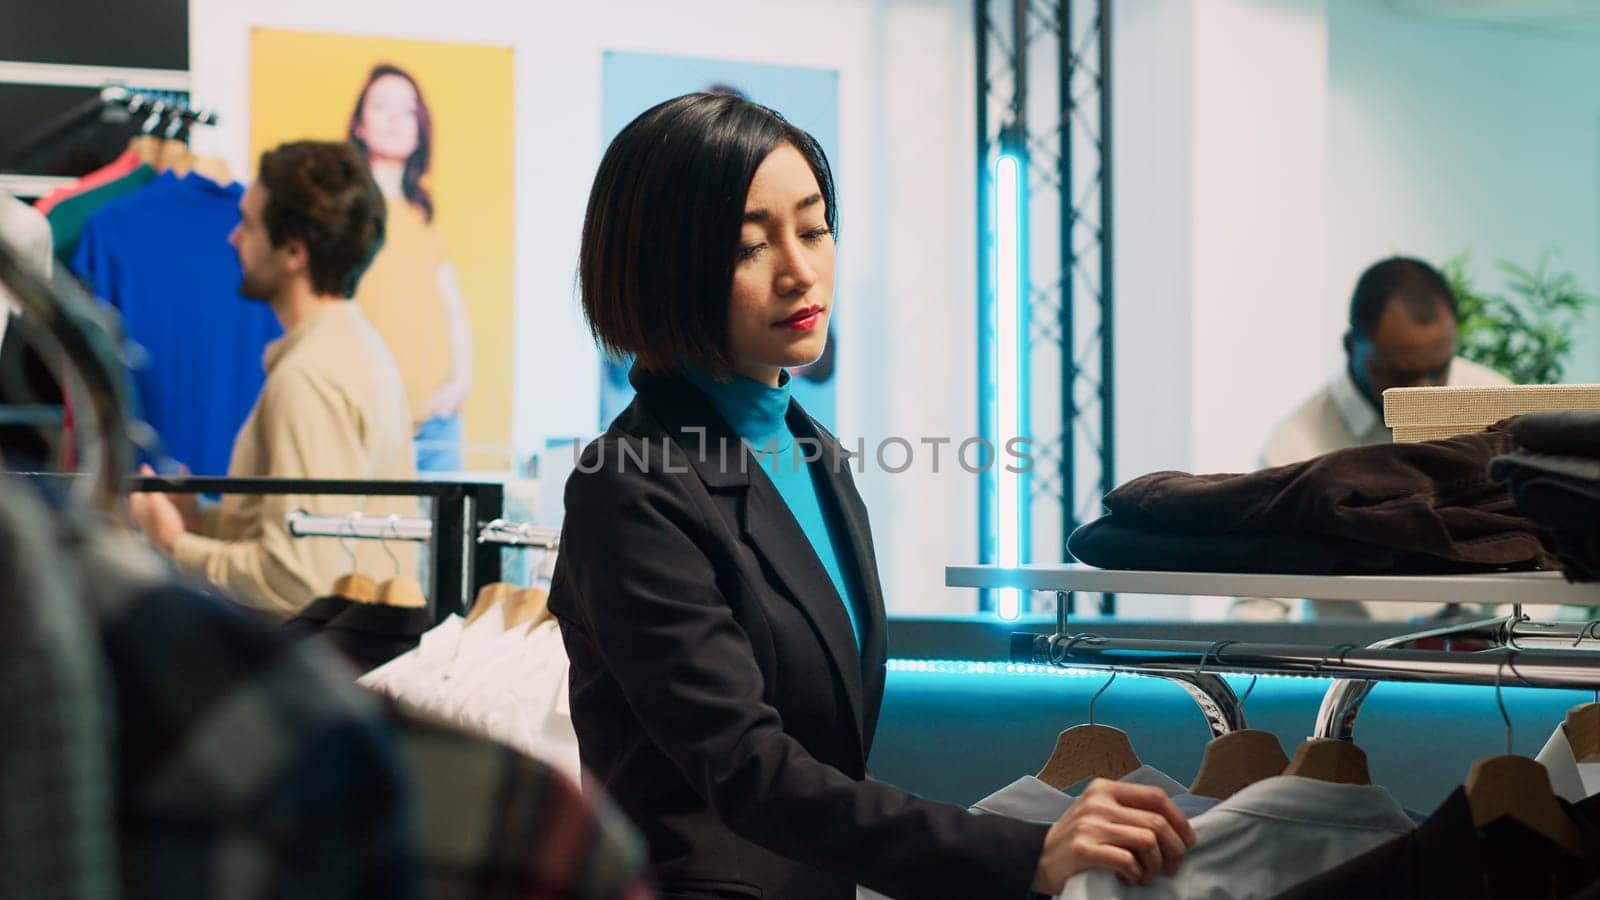 Young client shopping in fashionable boutique shop, looking at formal wear on hangers and racks. Woman buying trendy store merchandise from shopping mall, commercial activity.